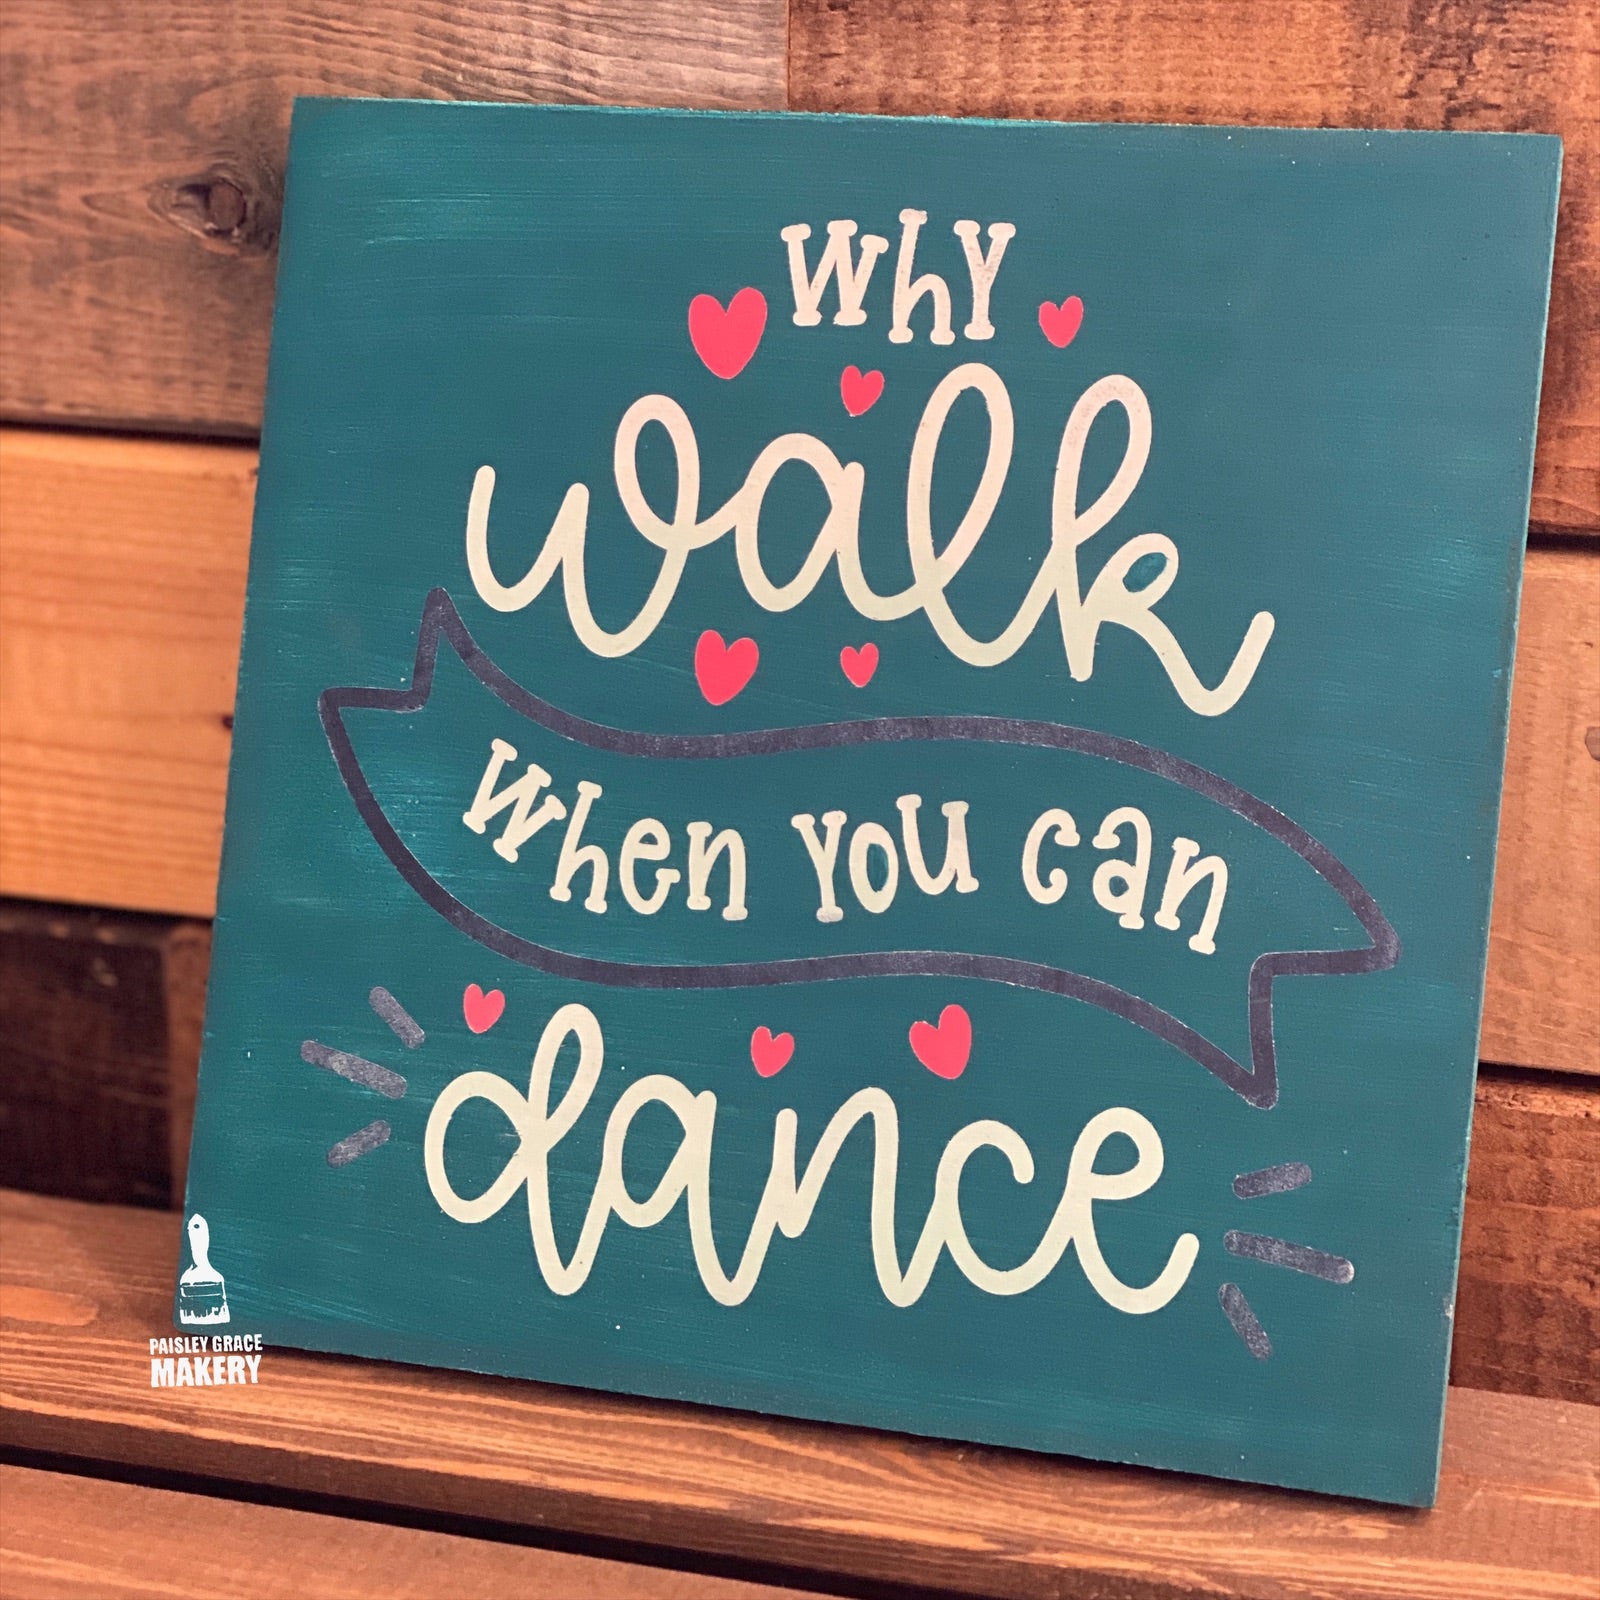 Why Walk when you can Dance: MINI DESIGN - Paisley Grace Makery